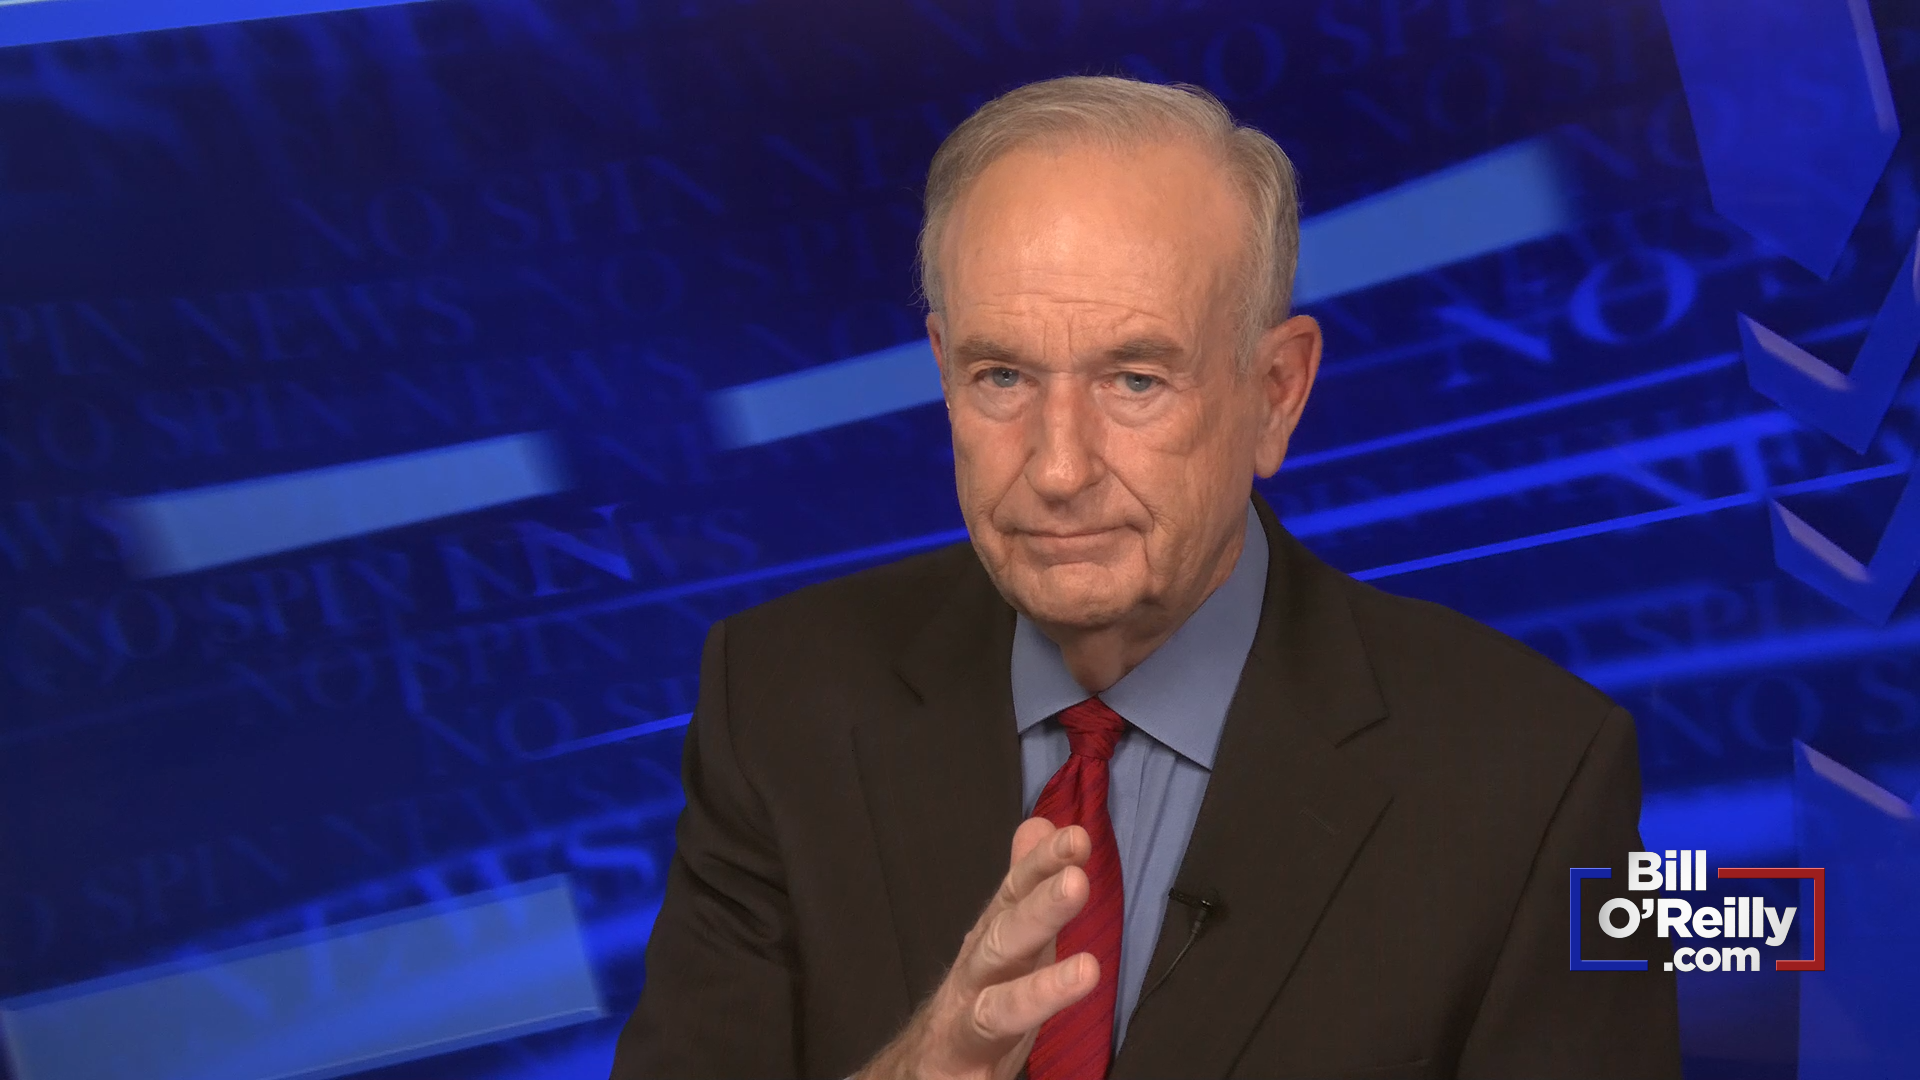 O'Reilly: This is a 'Hit Job'